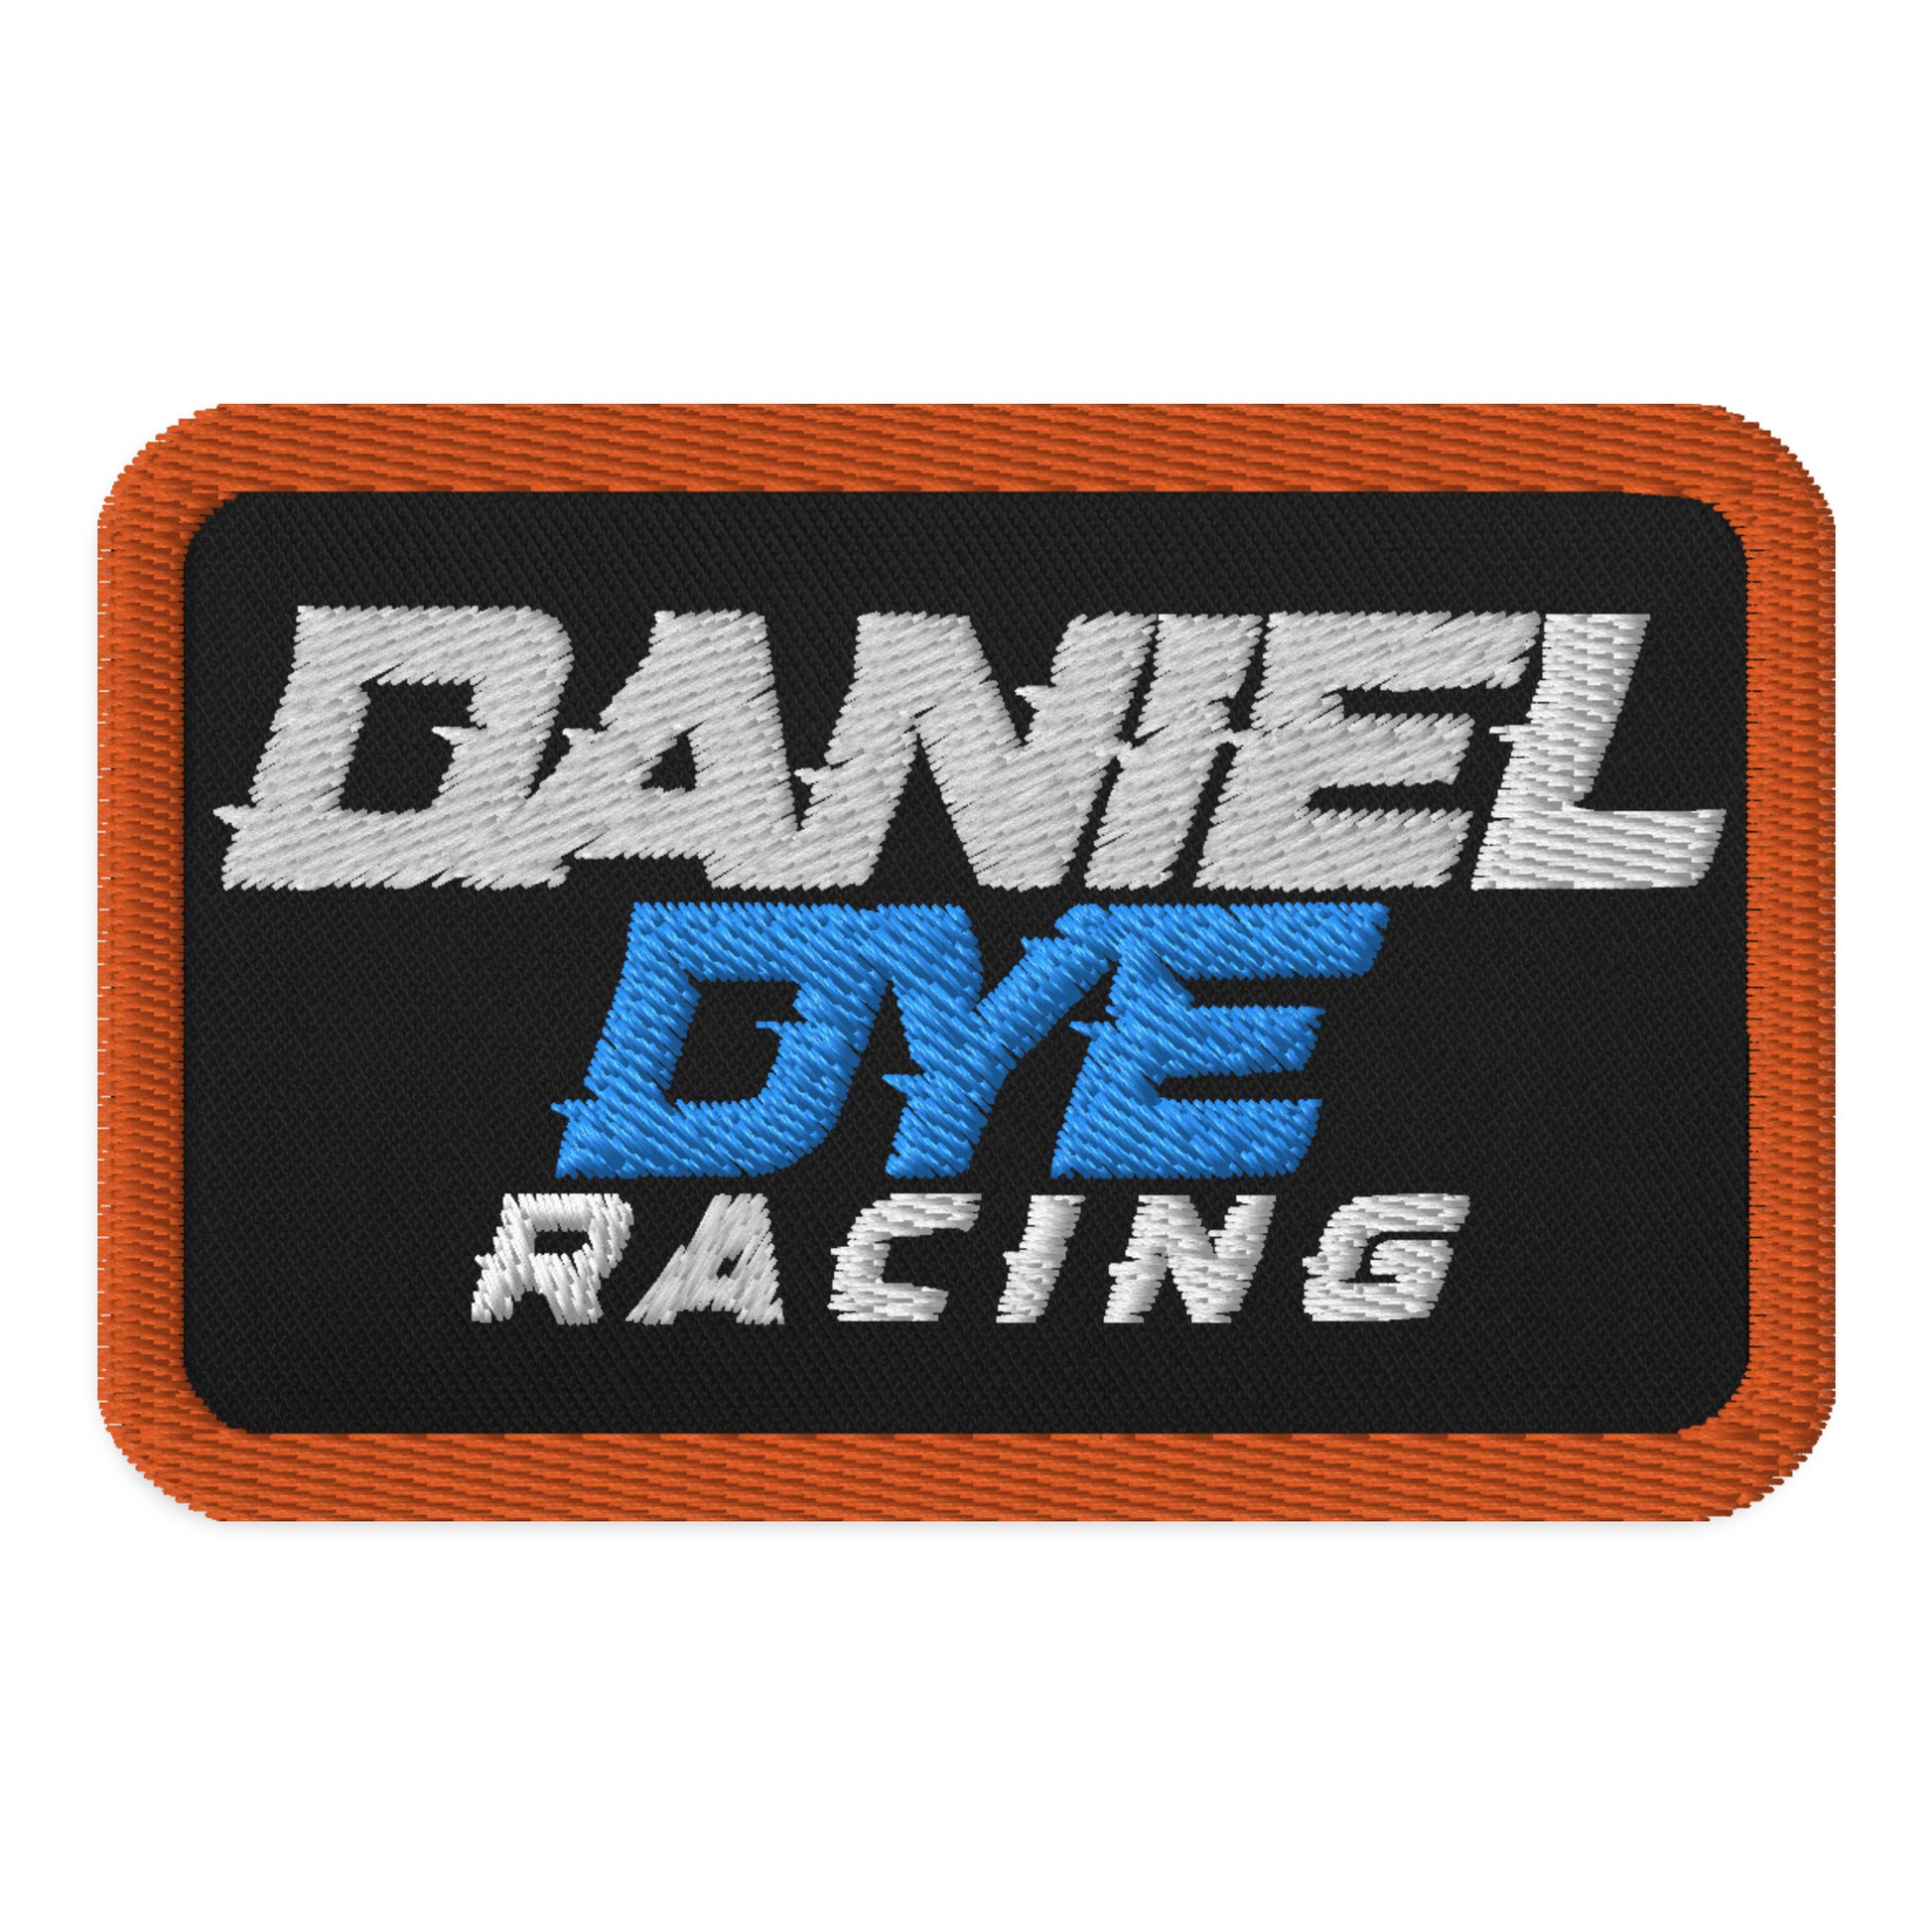 DDR Embroidered patch - [Daniel Dye Racing Shop]